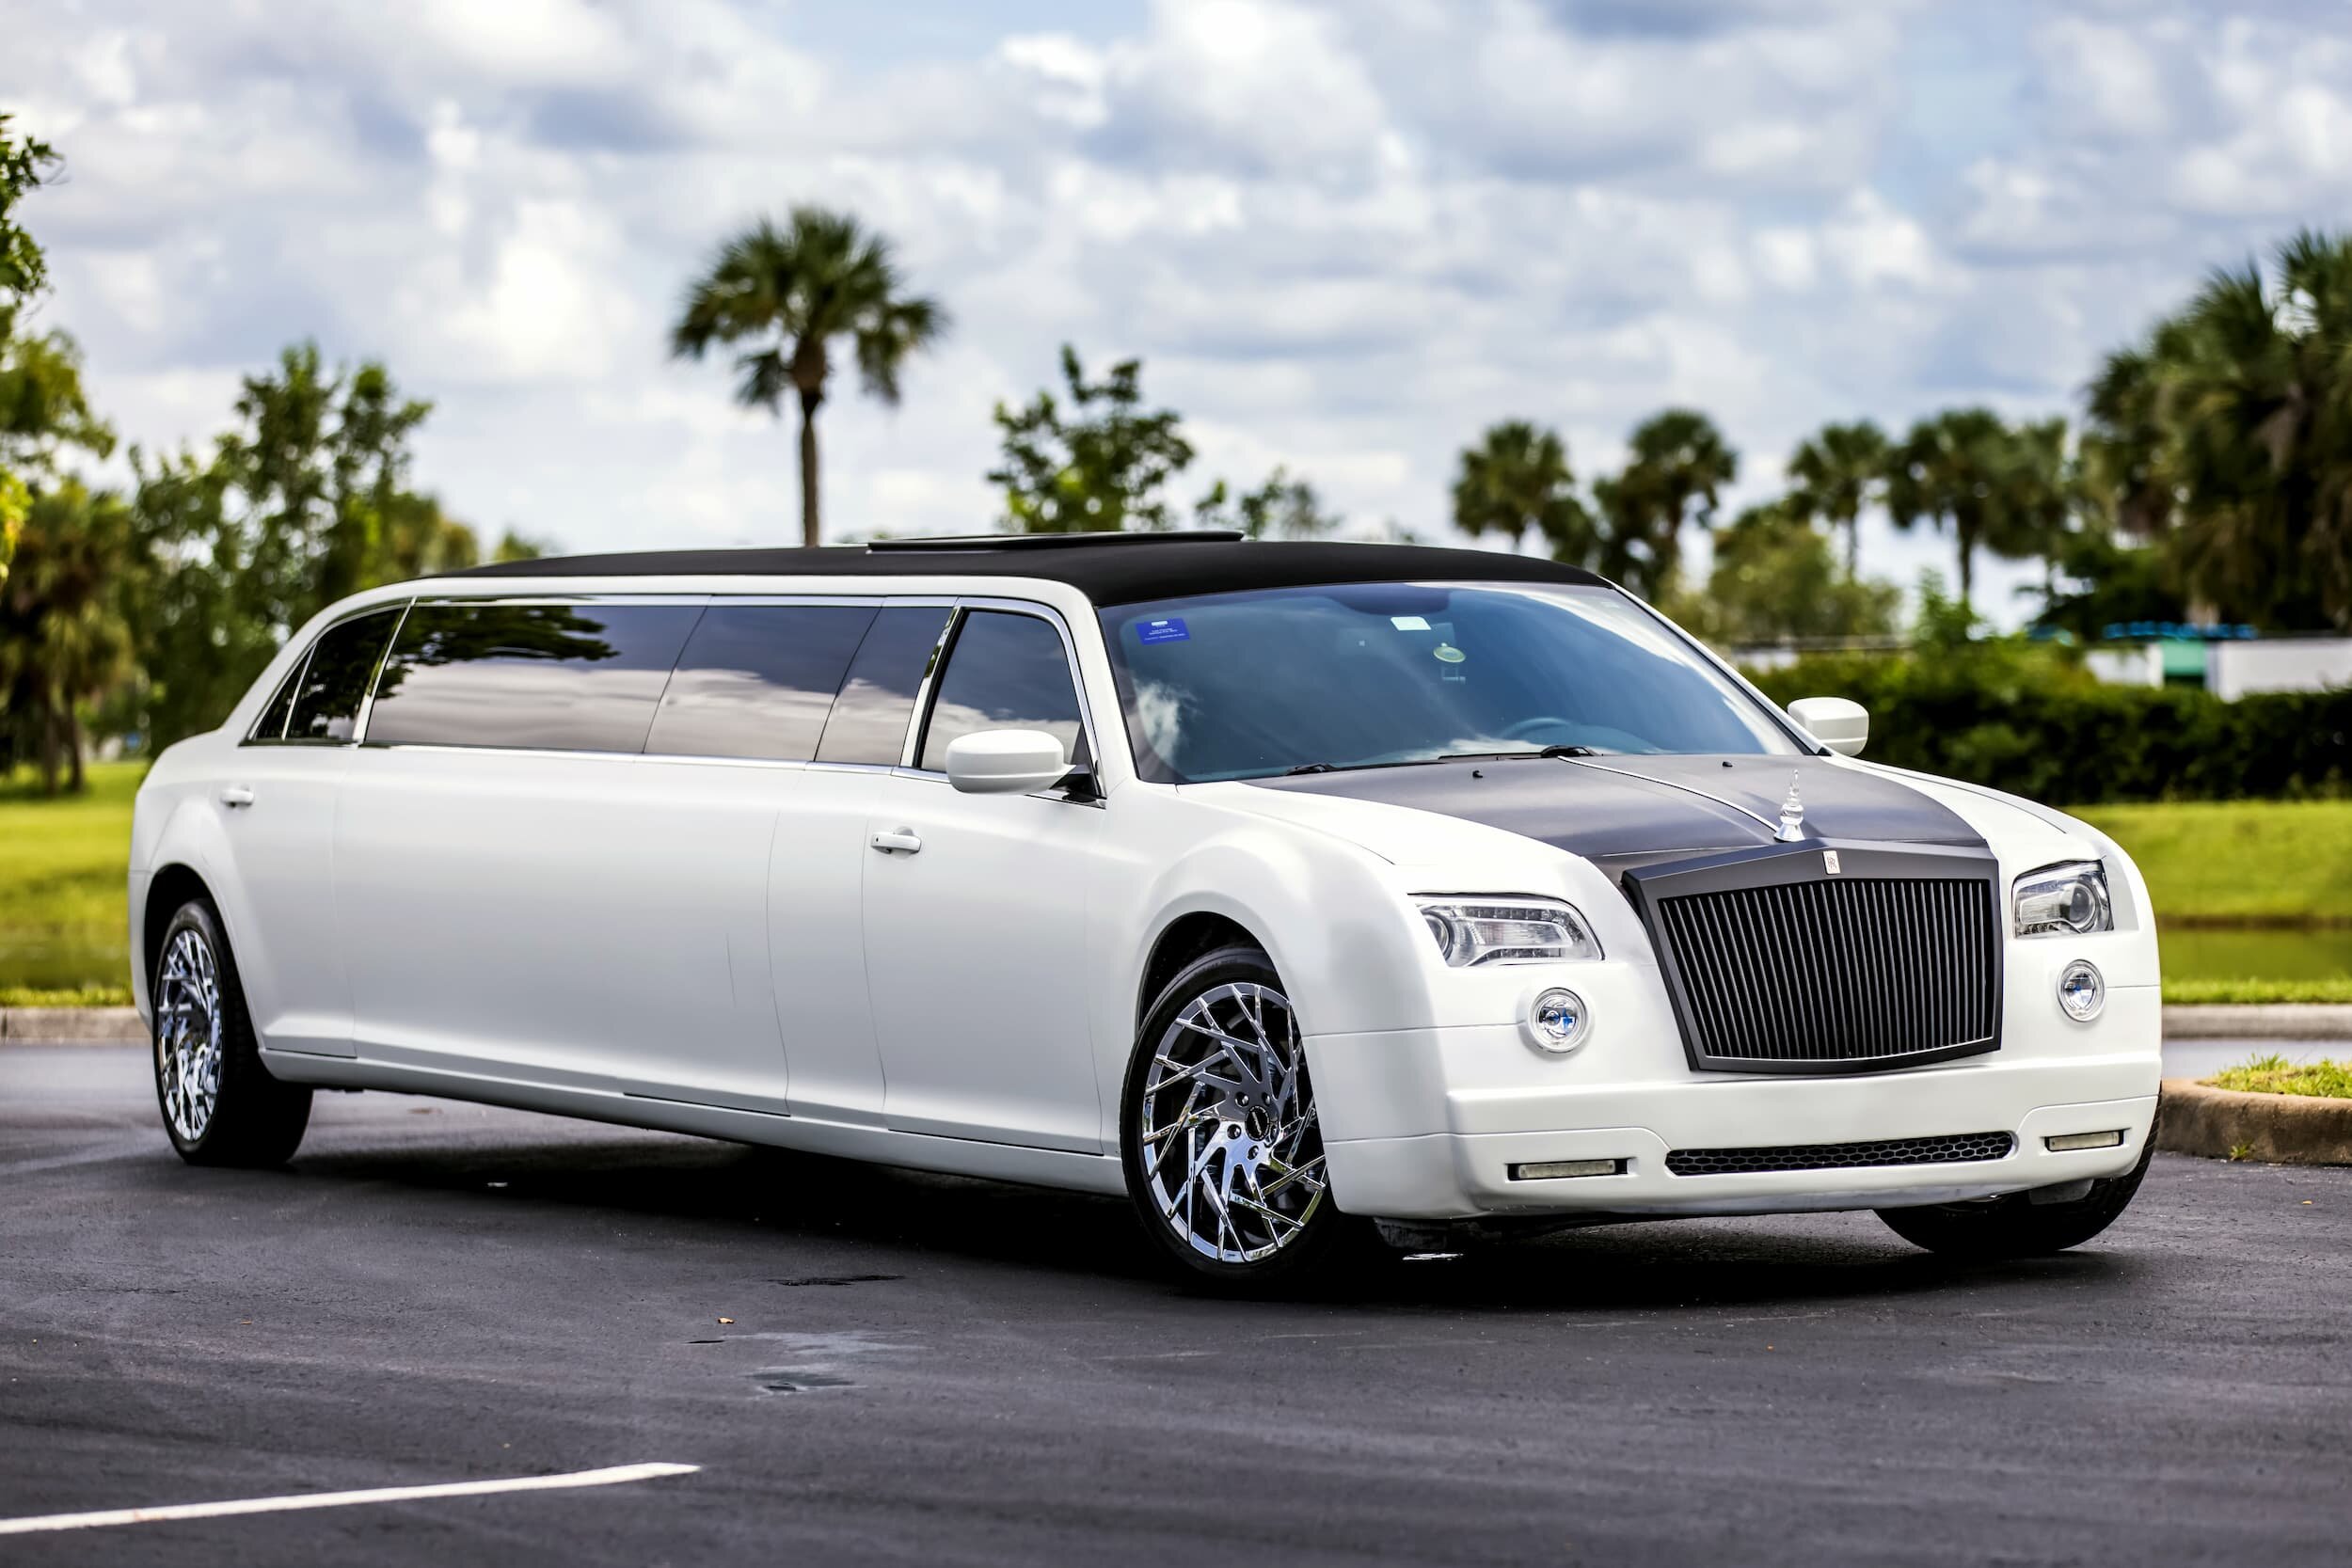 Stretch Limo Rentals in Chicago